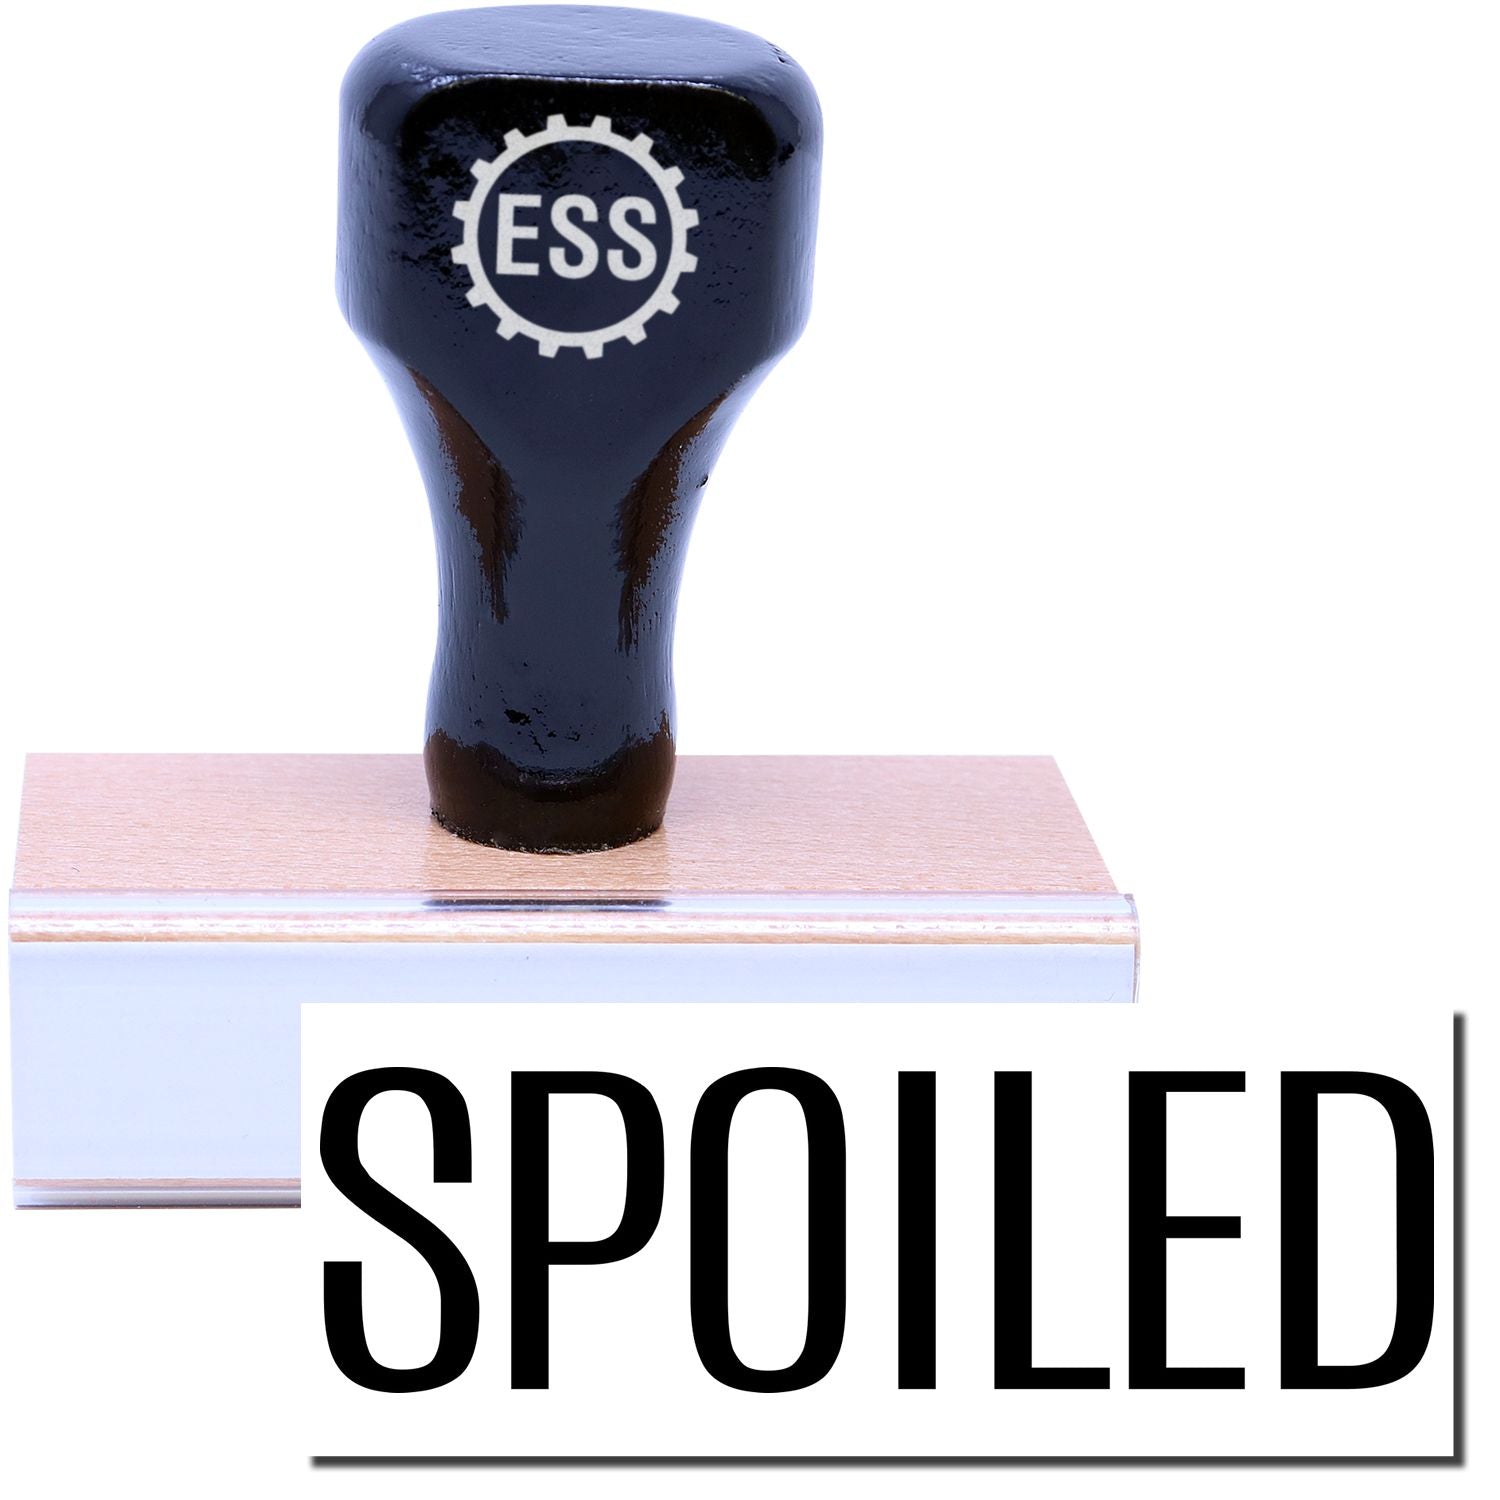 A stock office rubber stamp with a stamped image showing how the text "SPOILED" in a large font is displayed after stamping.